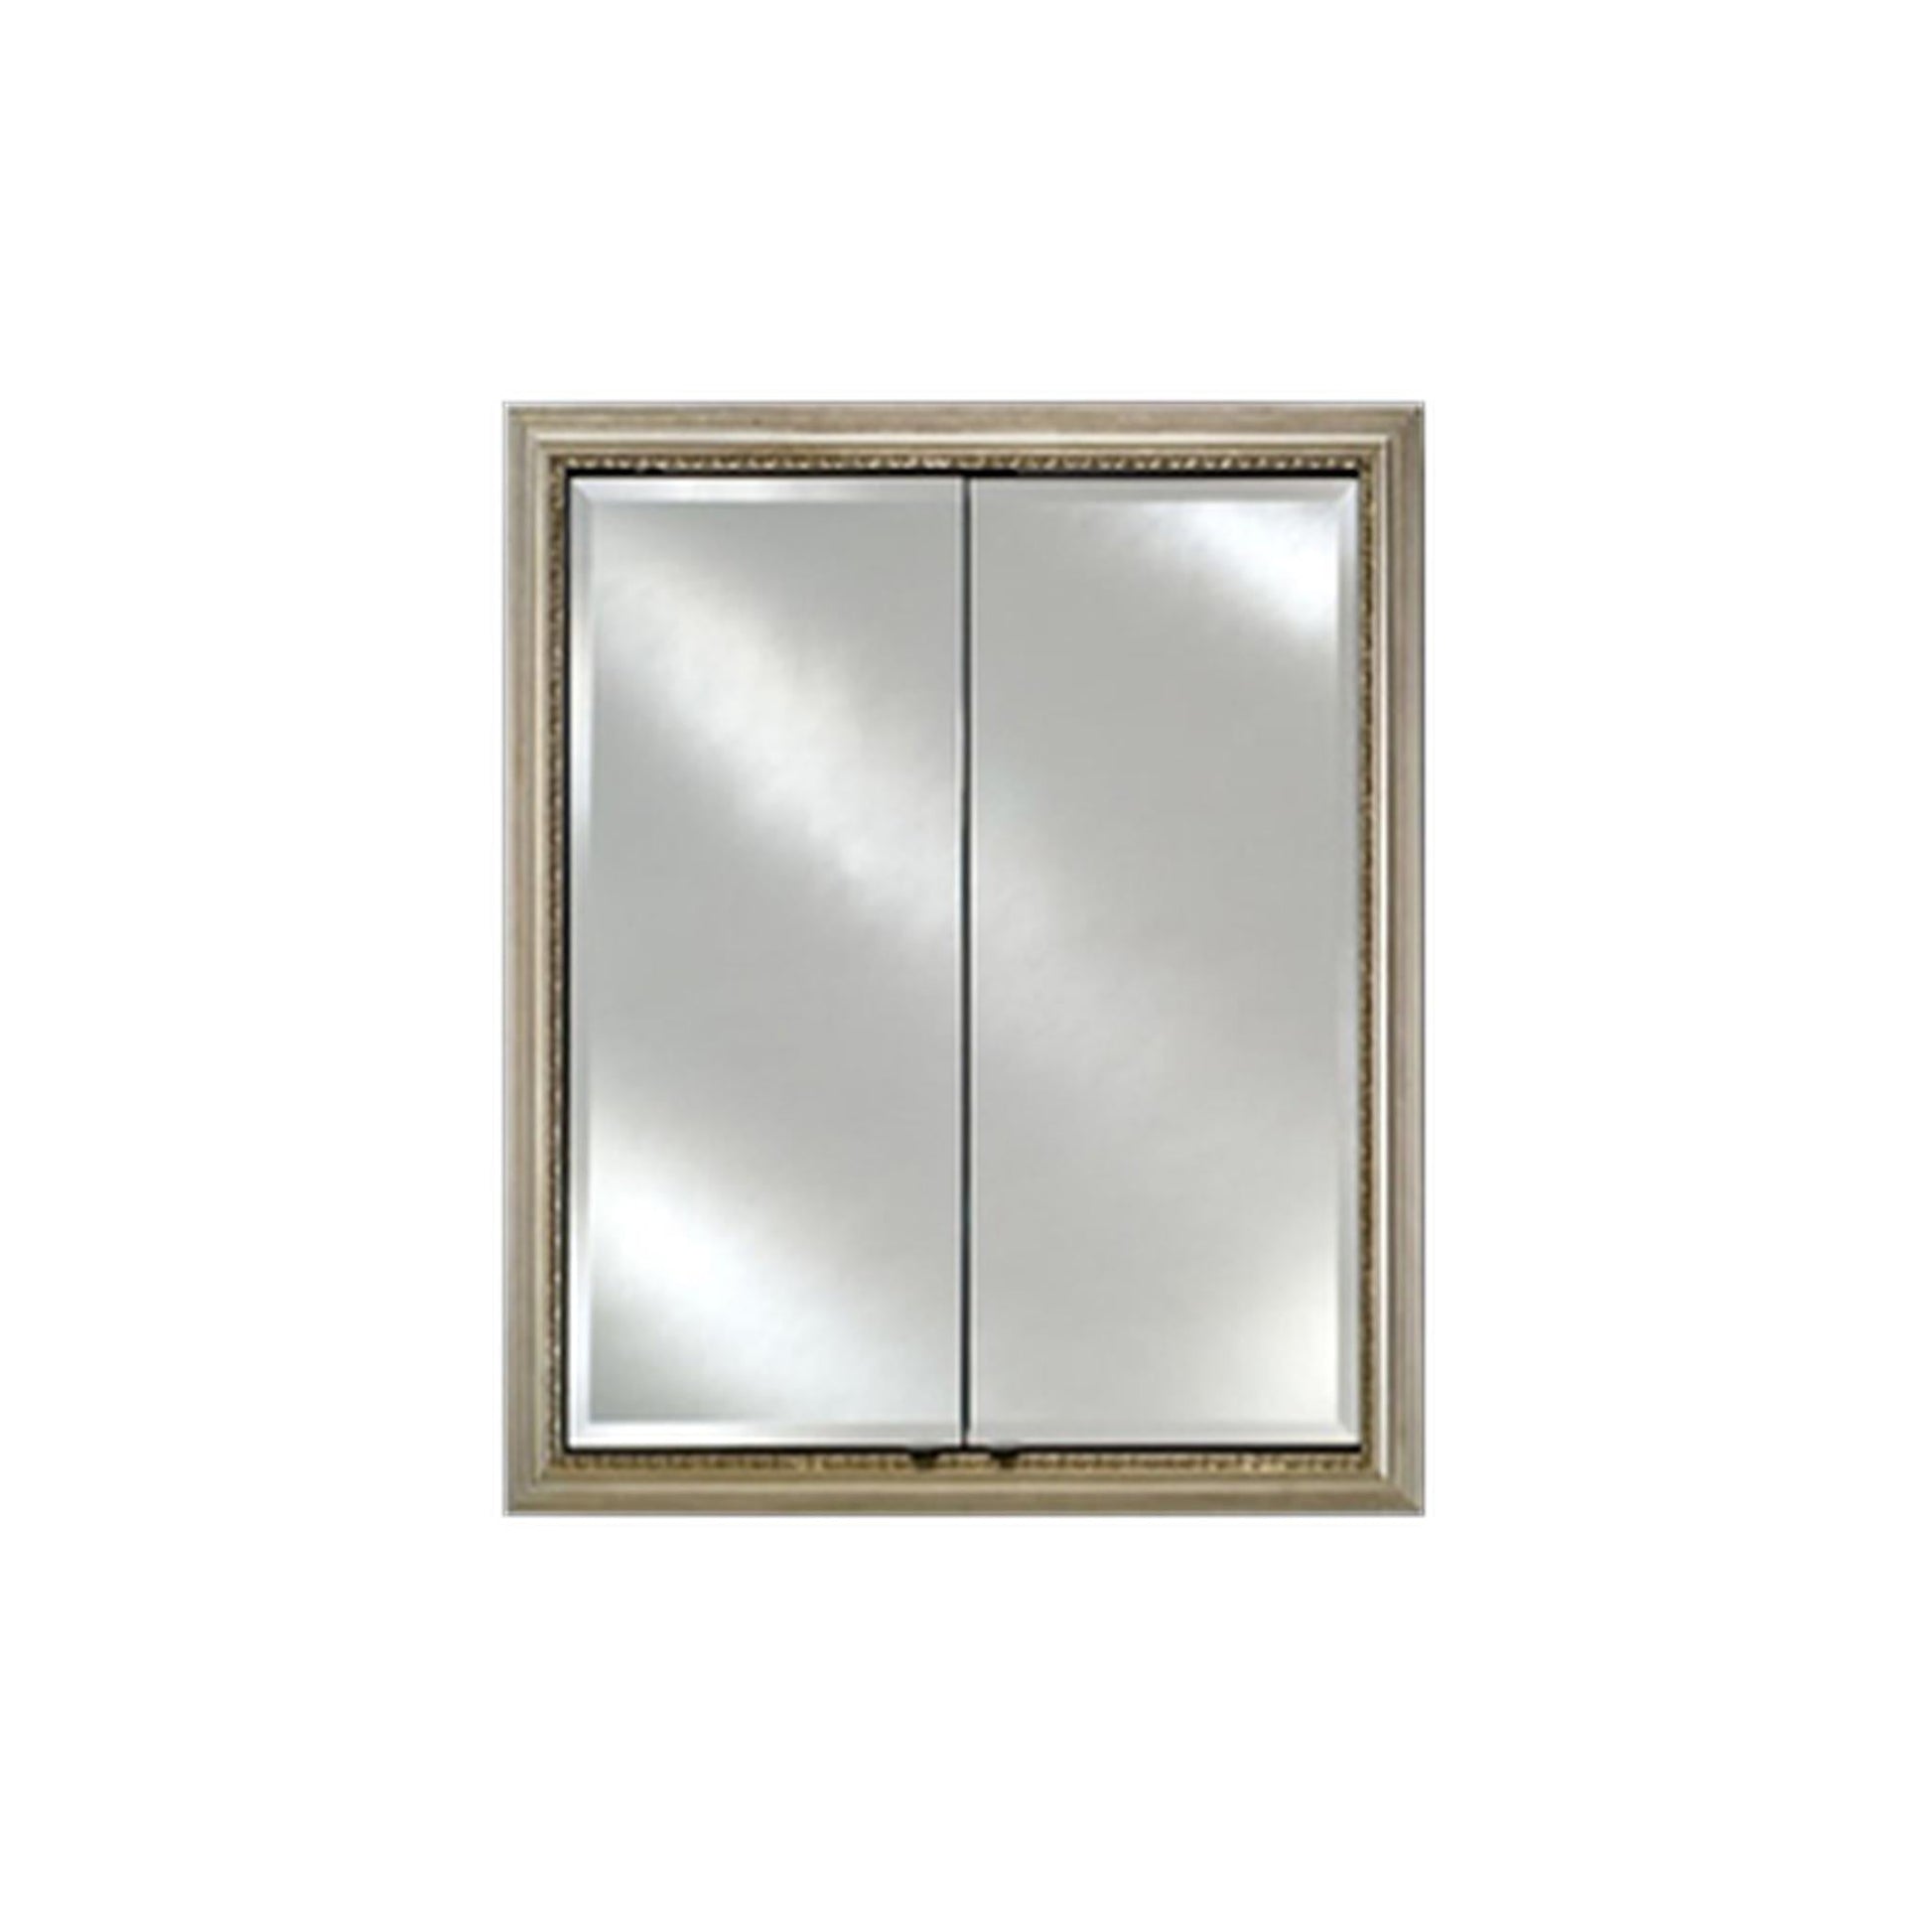 Afina Signature 27" x 21" Polished Glimmer-Flat Recessed Retro-Fit Double Door Medicine Cabinet With Beveled Edge Mirror